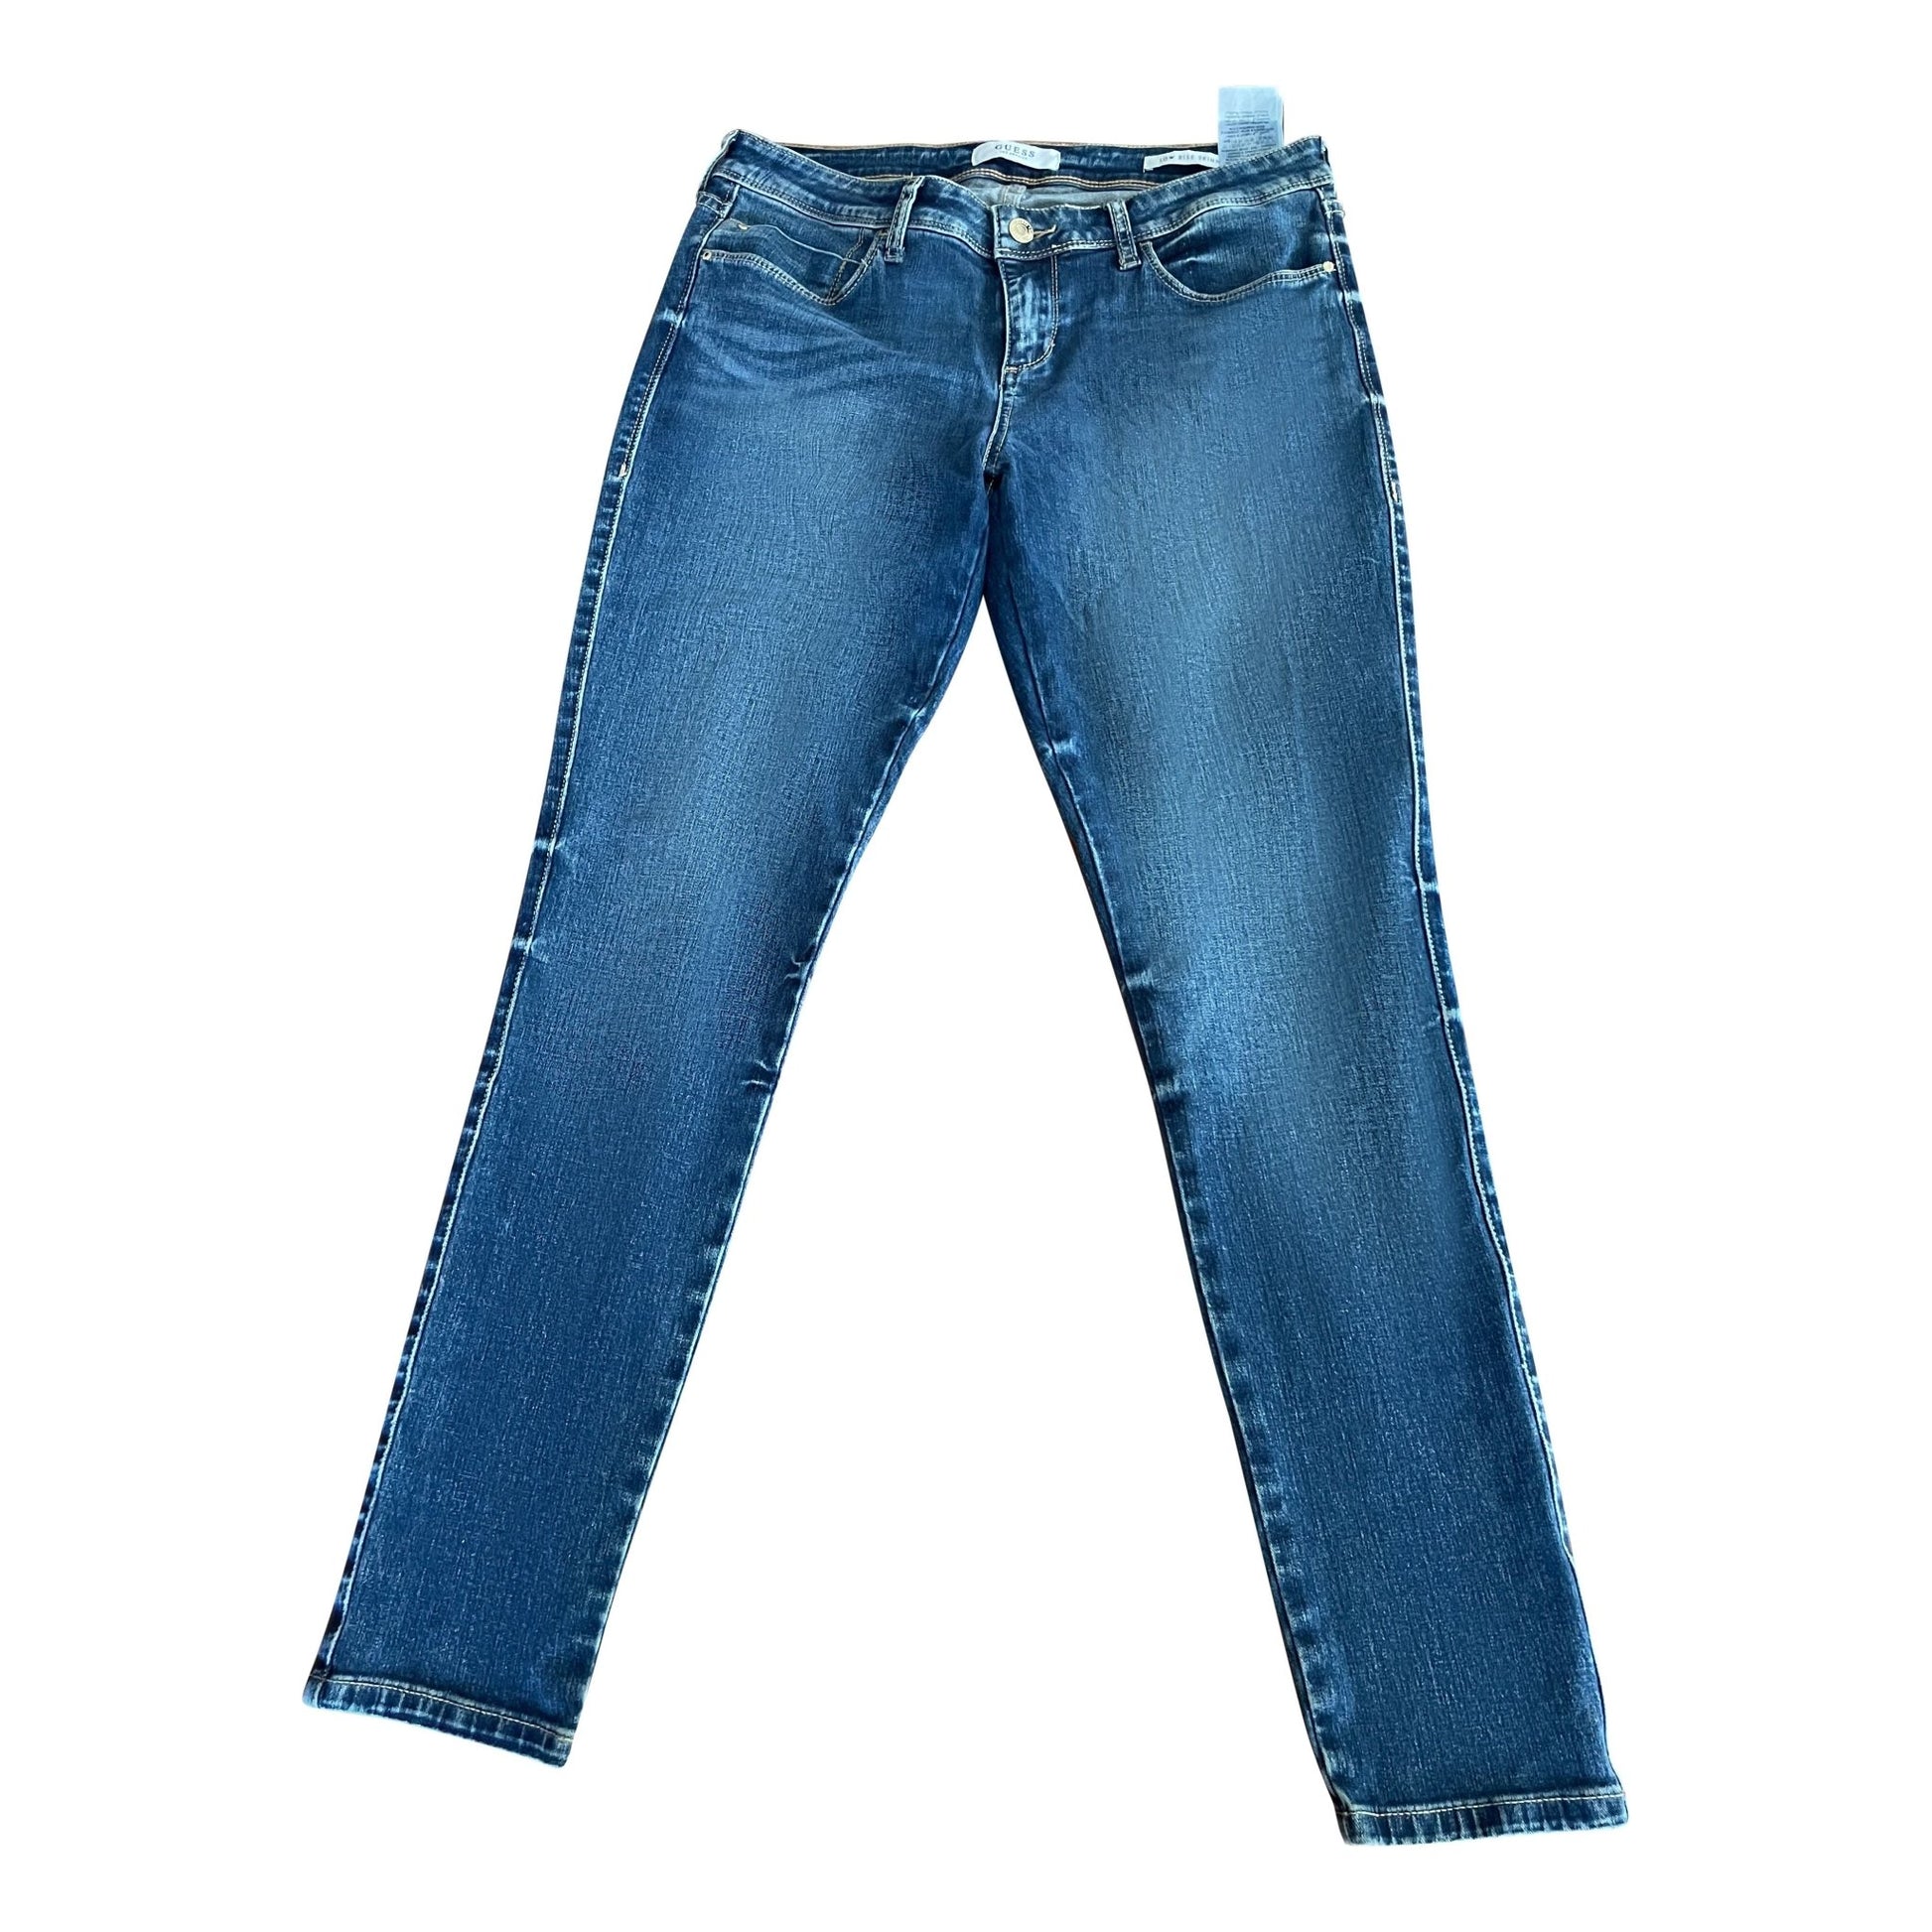 Guess blue low rise skinny jeans | size 30